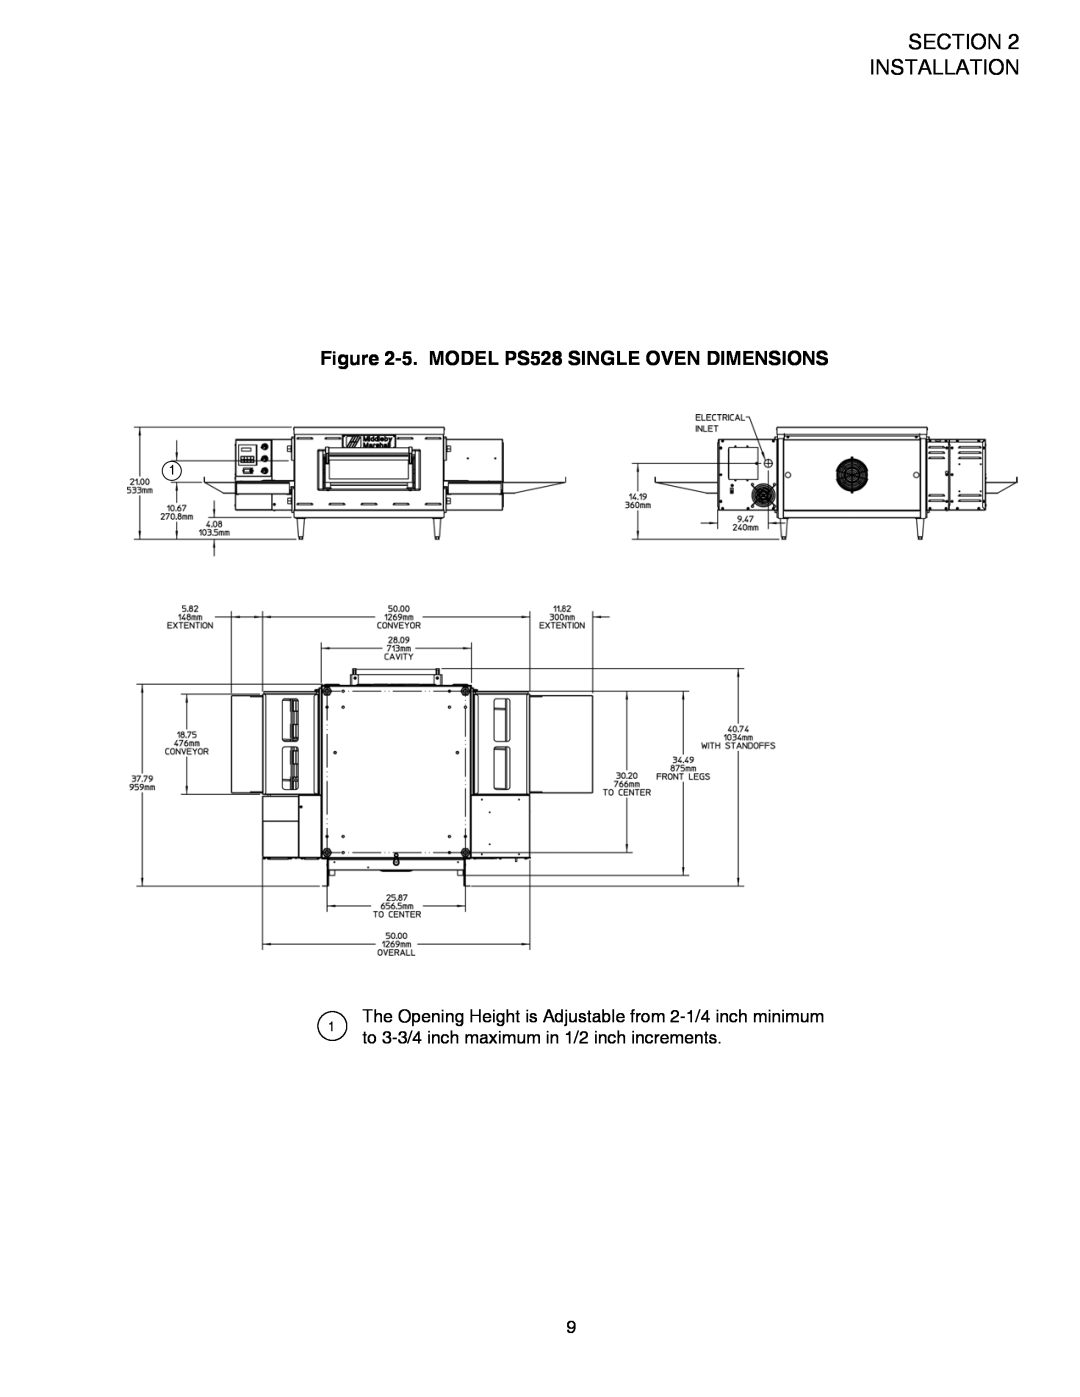 Middleby Marshall PS528 (Double), PS528E, PS528 (Triple) installation manual 5. MODEL PS528 SINGLE OVEN DIMENSIONS 